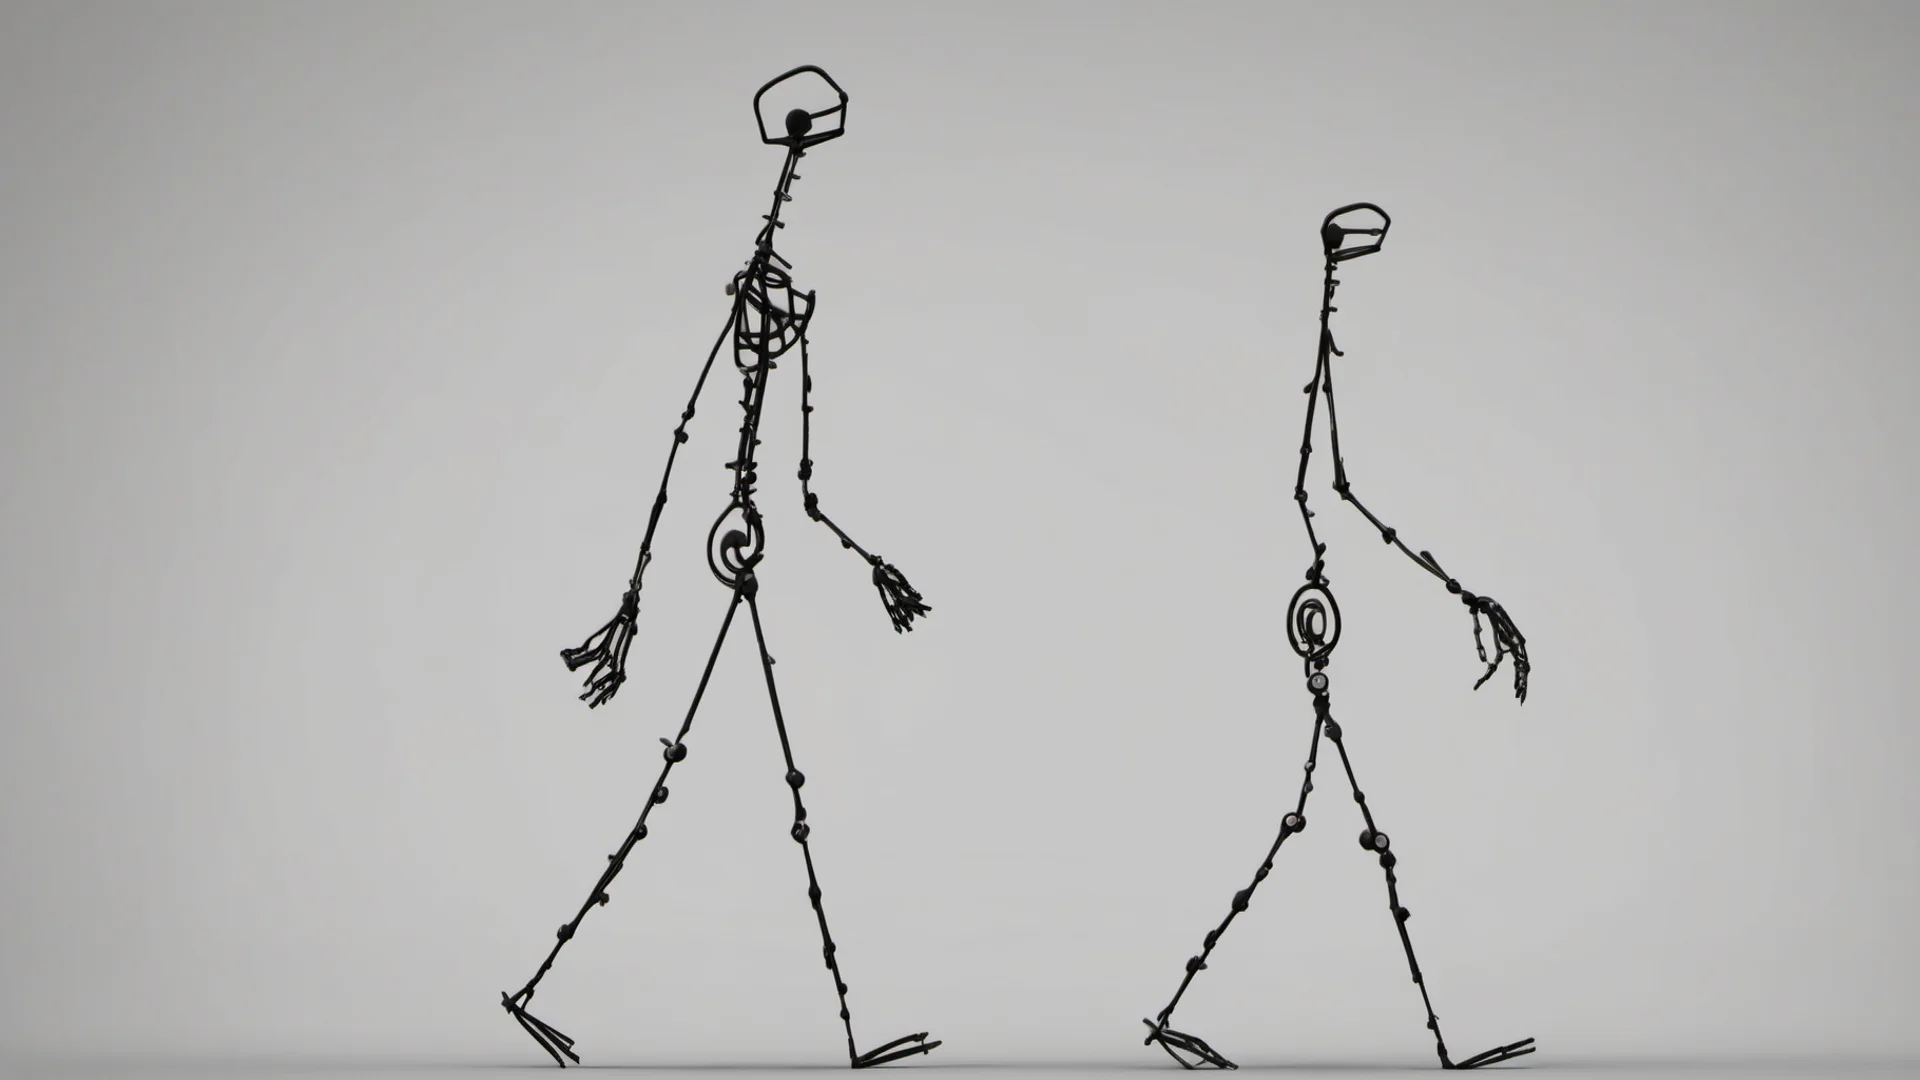 stickman walking frame by frame animation confident engaging wow artstation art 3 wide